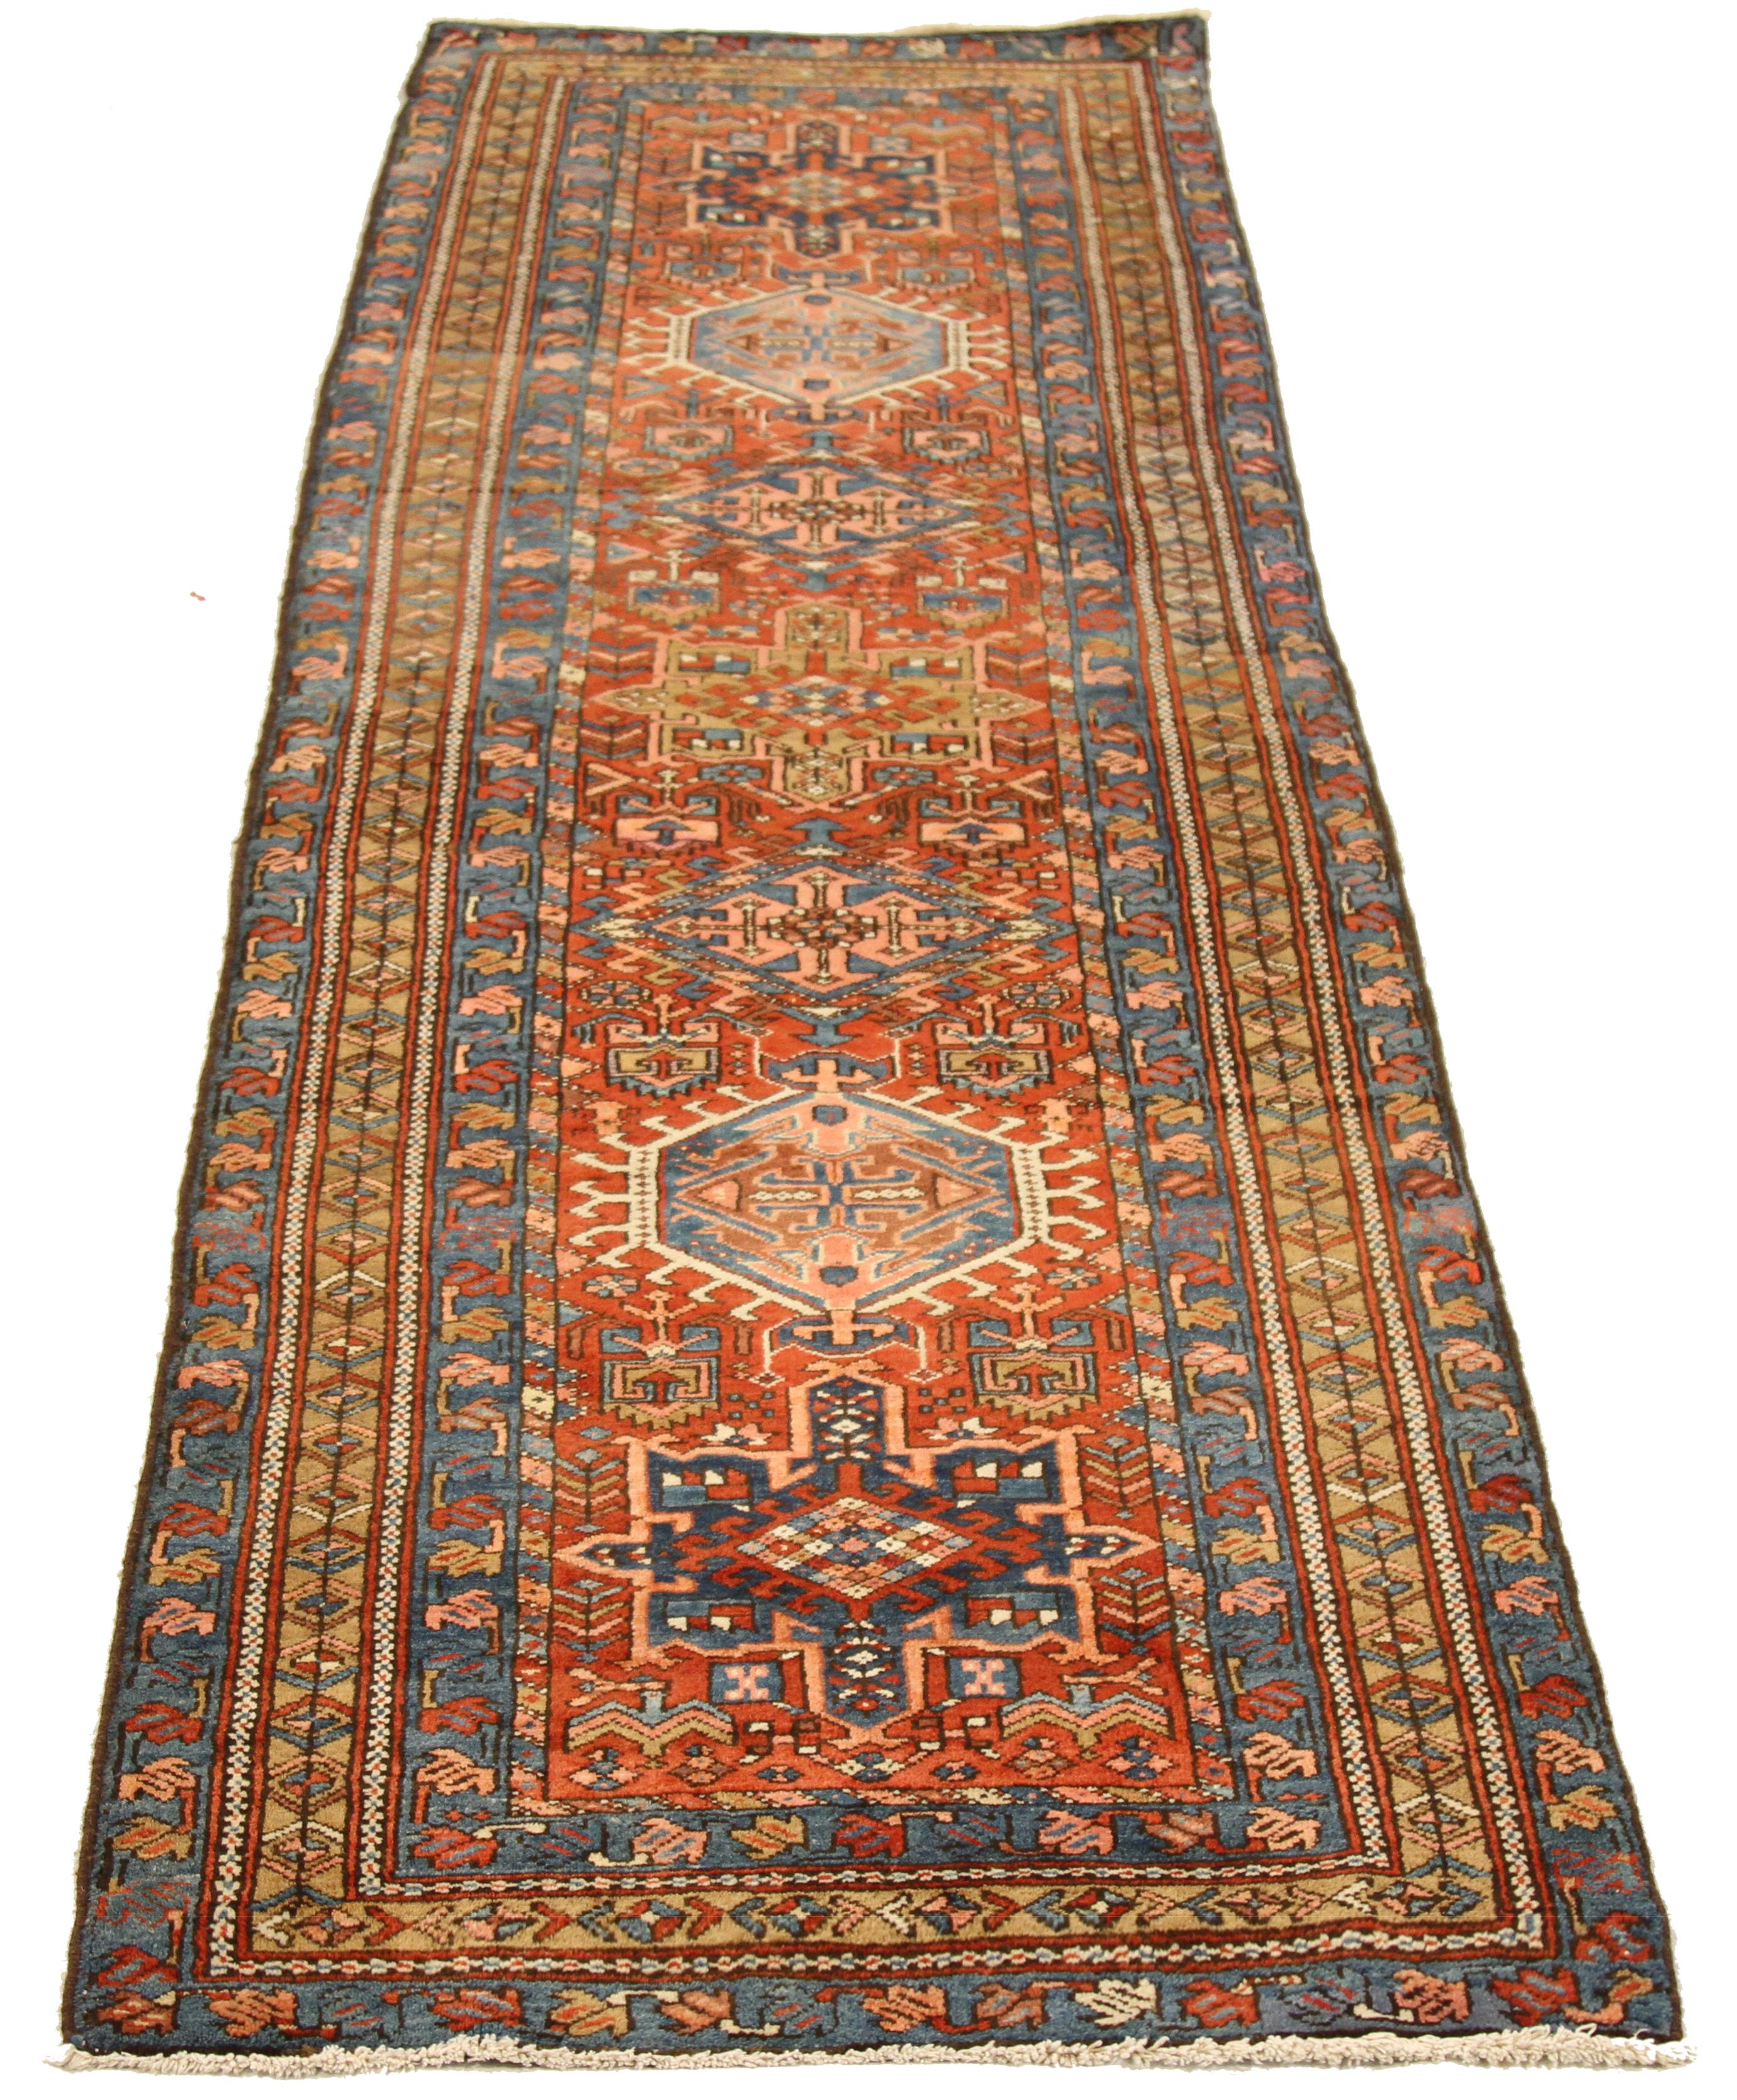 Antique mid-20th century handwoven Persian runner rug made from fine wool and all-natural vegetable dyes that are safe for people and pets. This beautiful piece features ornate floral patterns in various colors which Heriz rugs are known for.